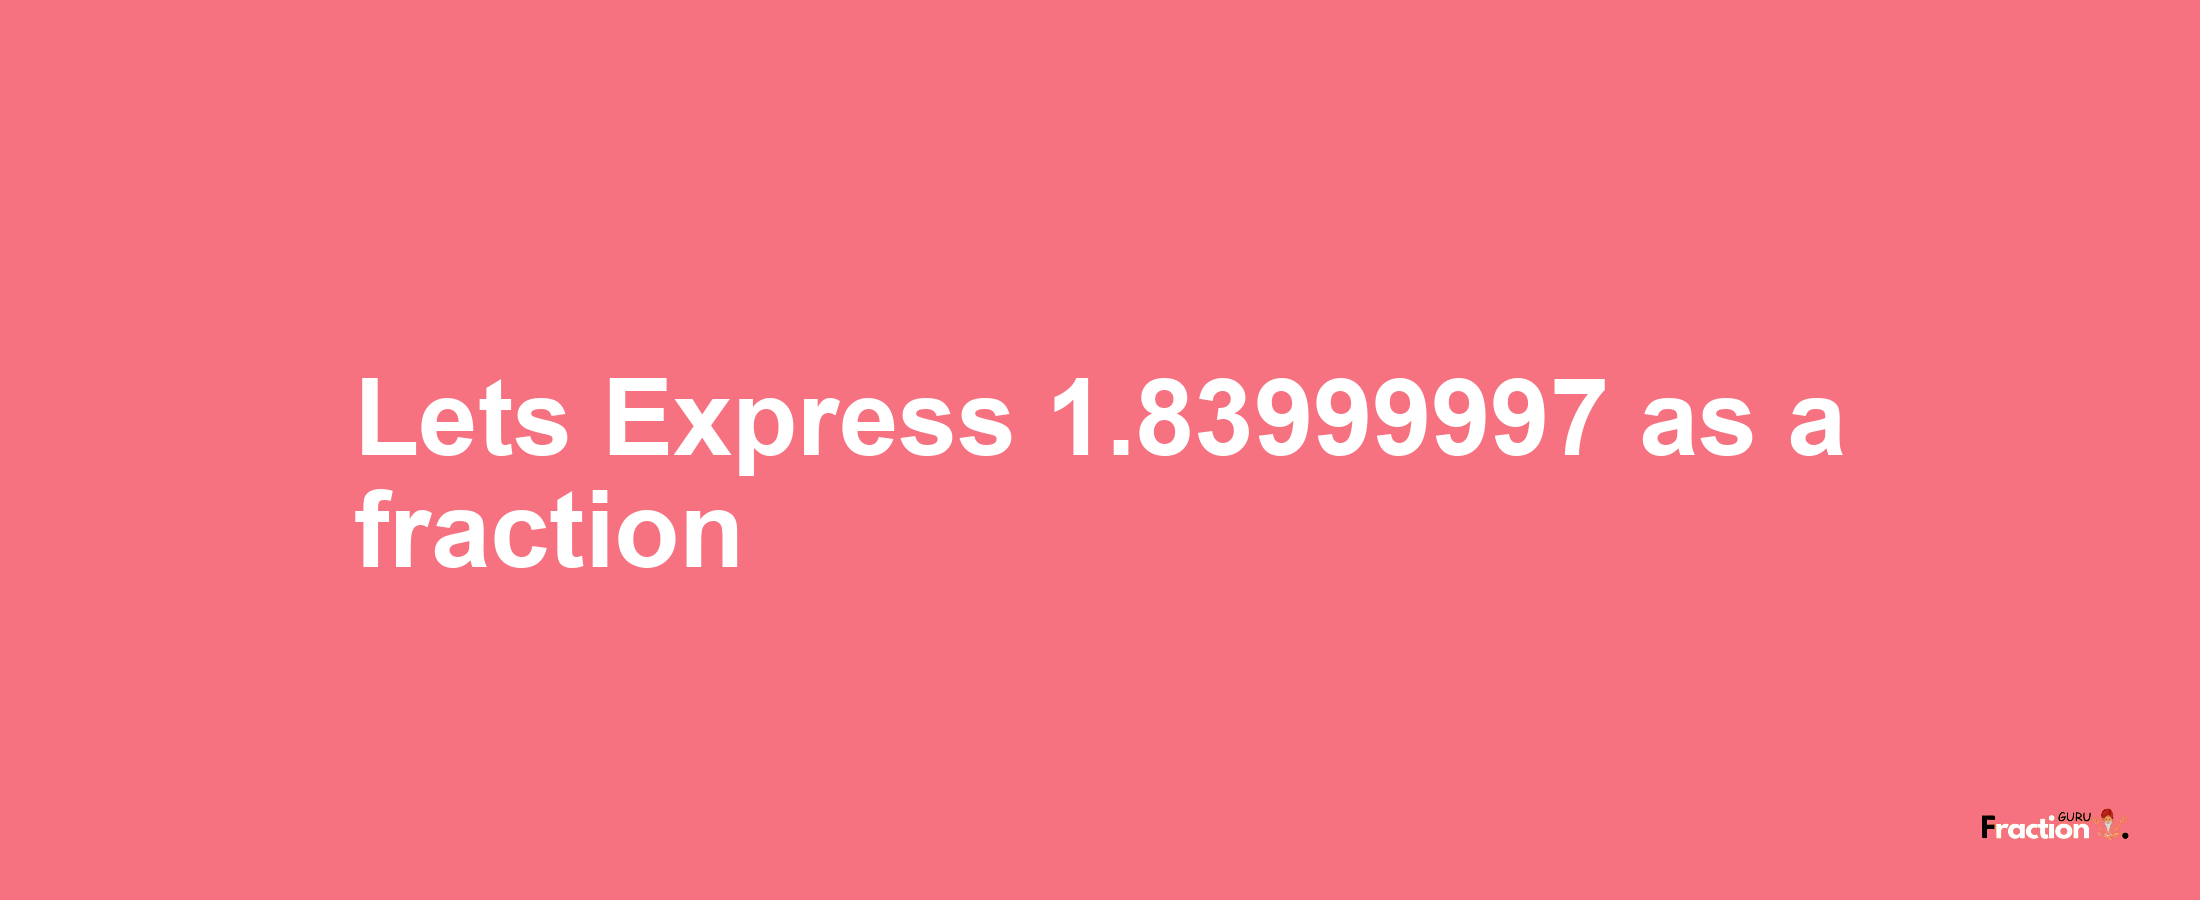 Lets Express 1.83999997 as afraction